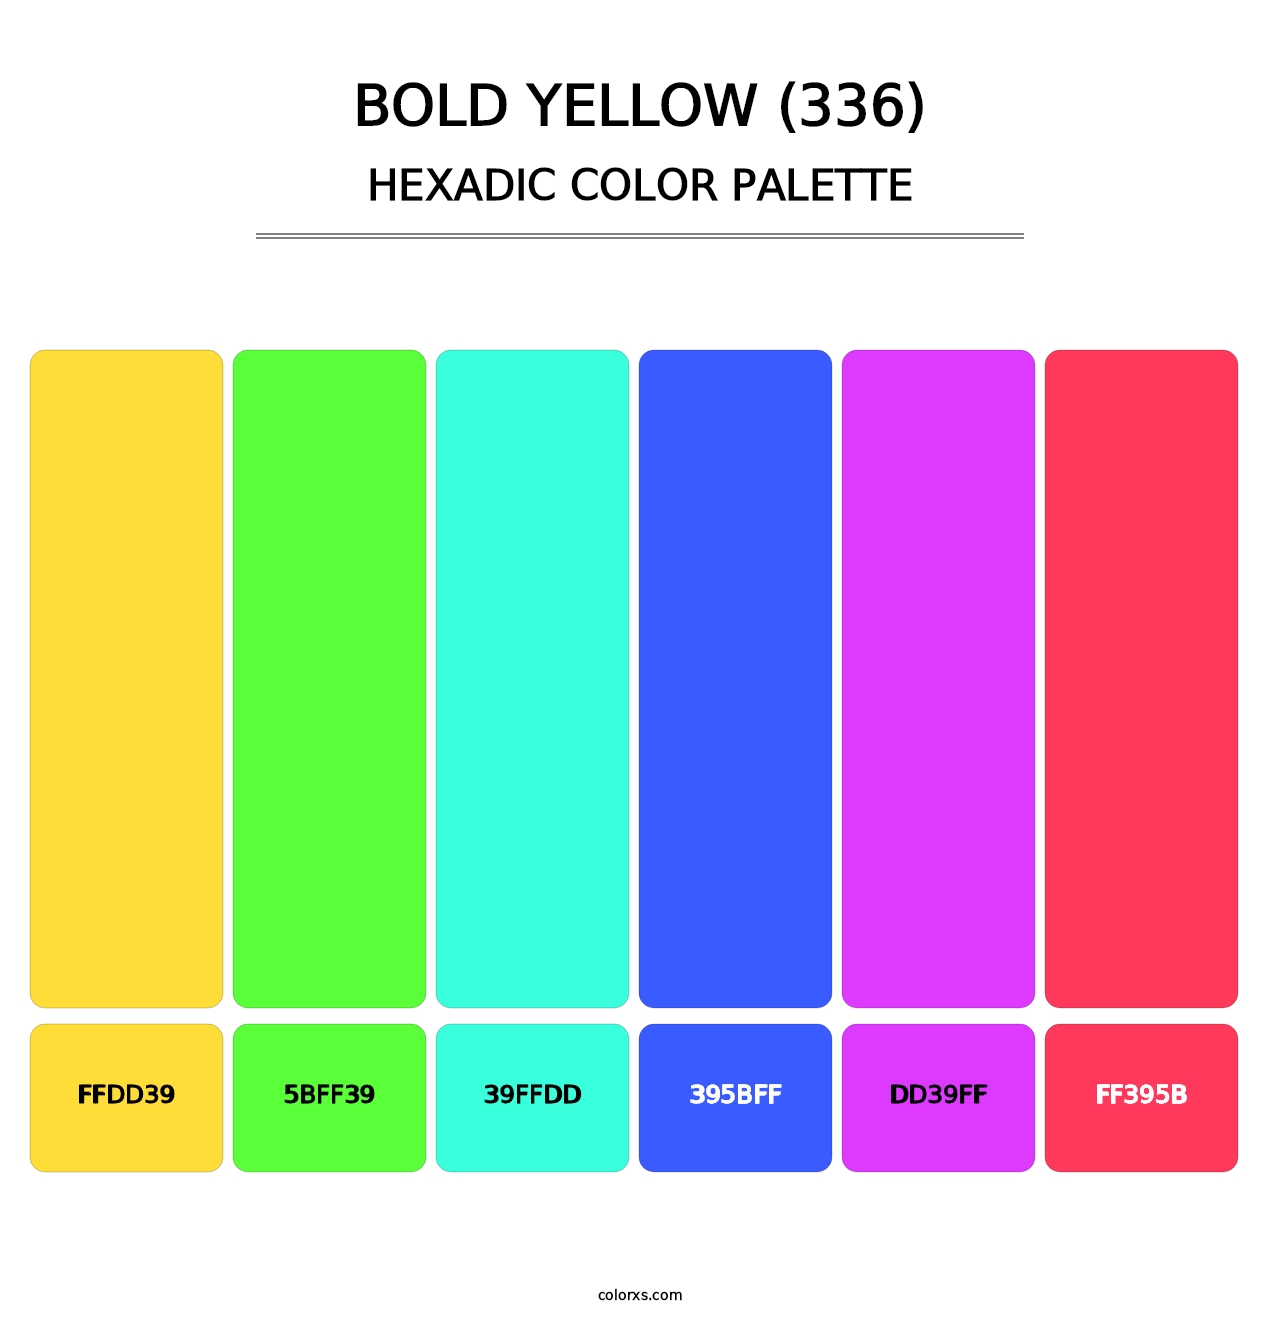 Bold Yellow (336) - Hexadic Color Palette